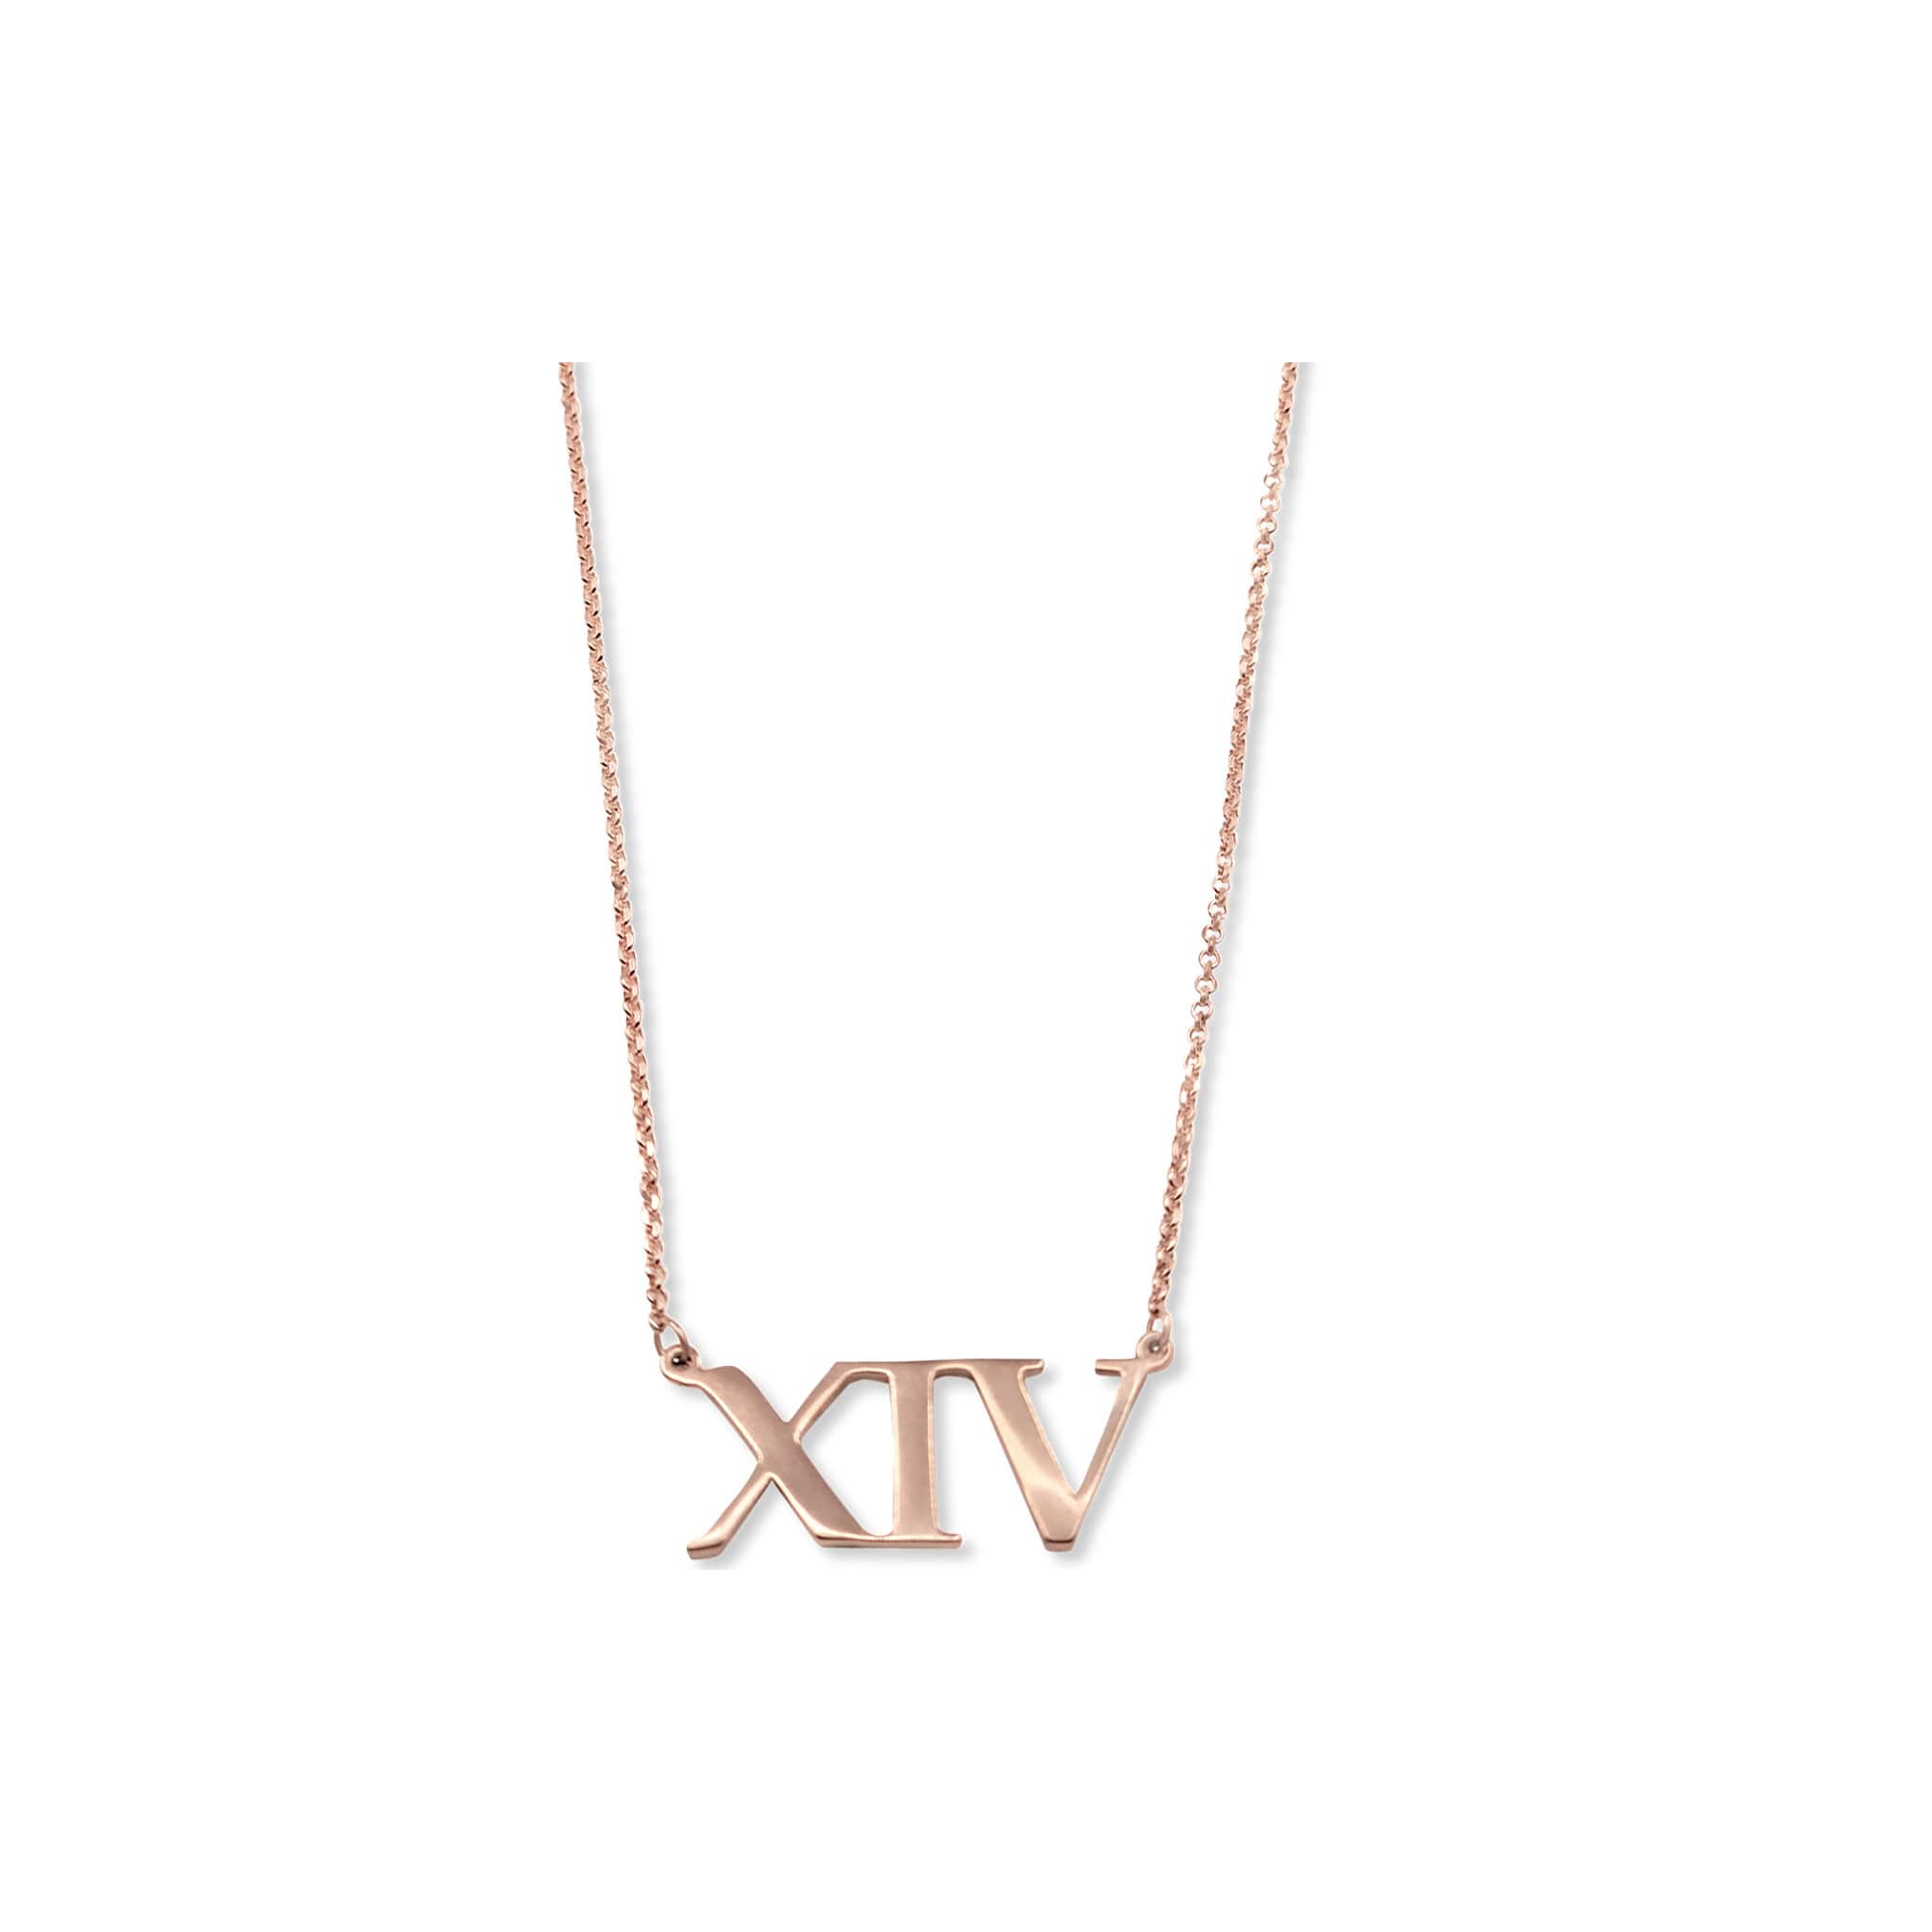 Rose Gold XIV Nameplate Necklace